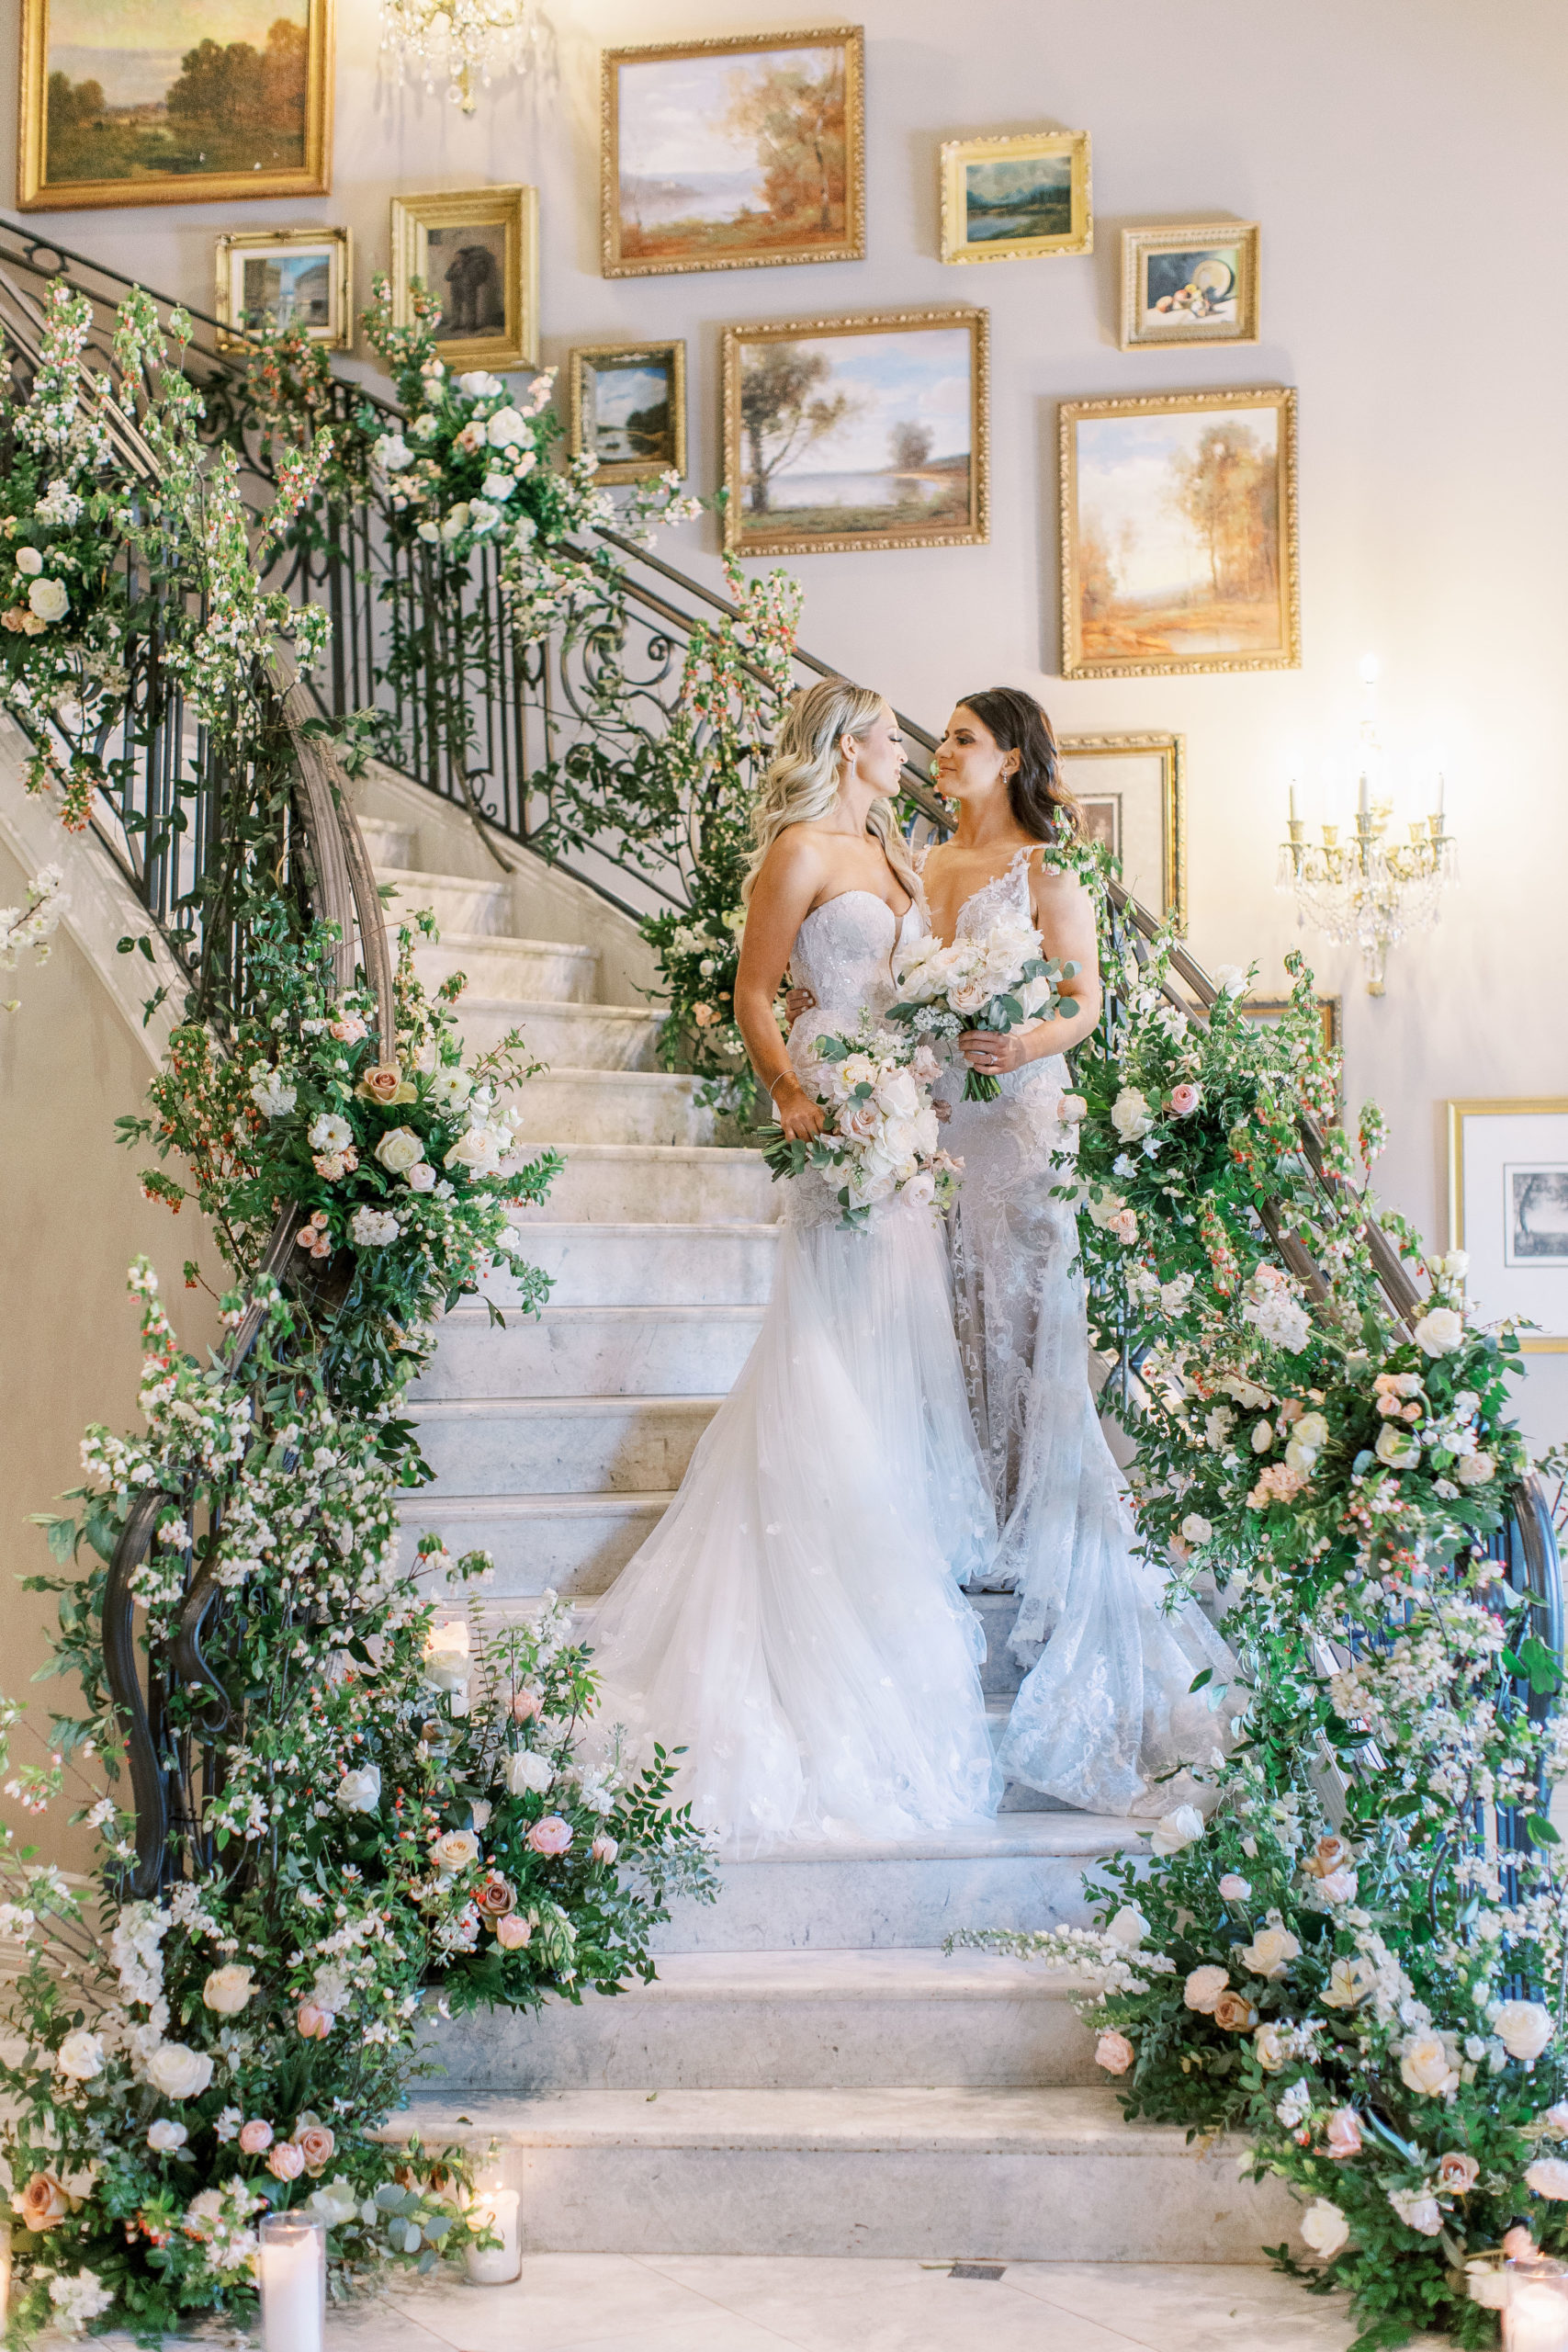 Brides embrace smiling on grand staircase with roses on banisters for a Romantic Park Chateau Wedding Photography